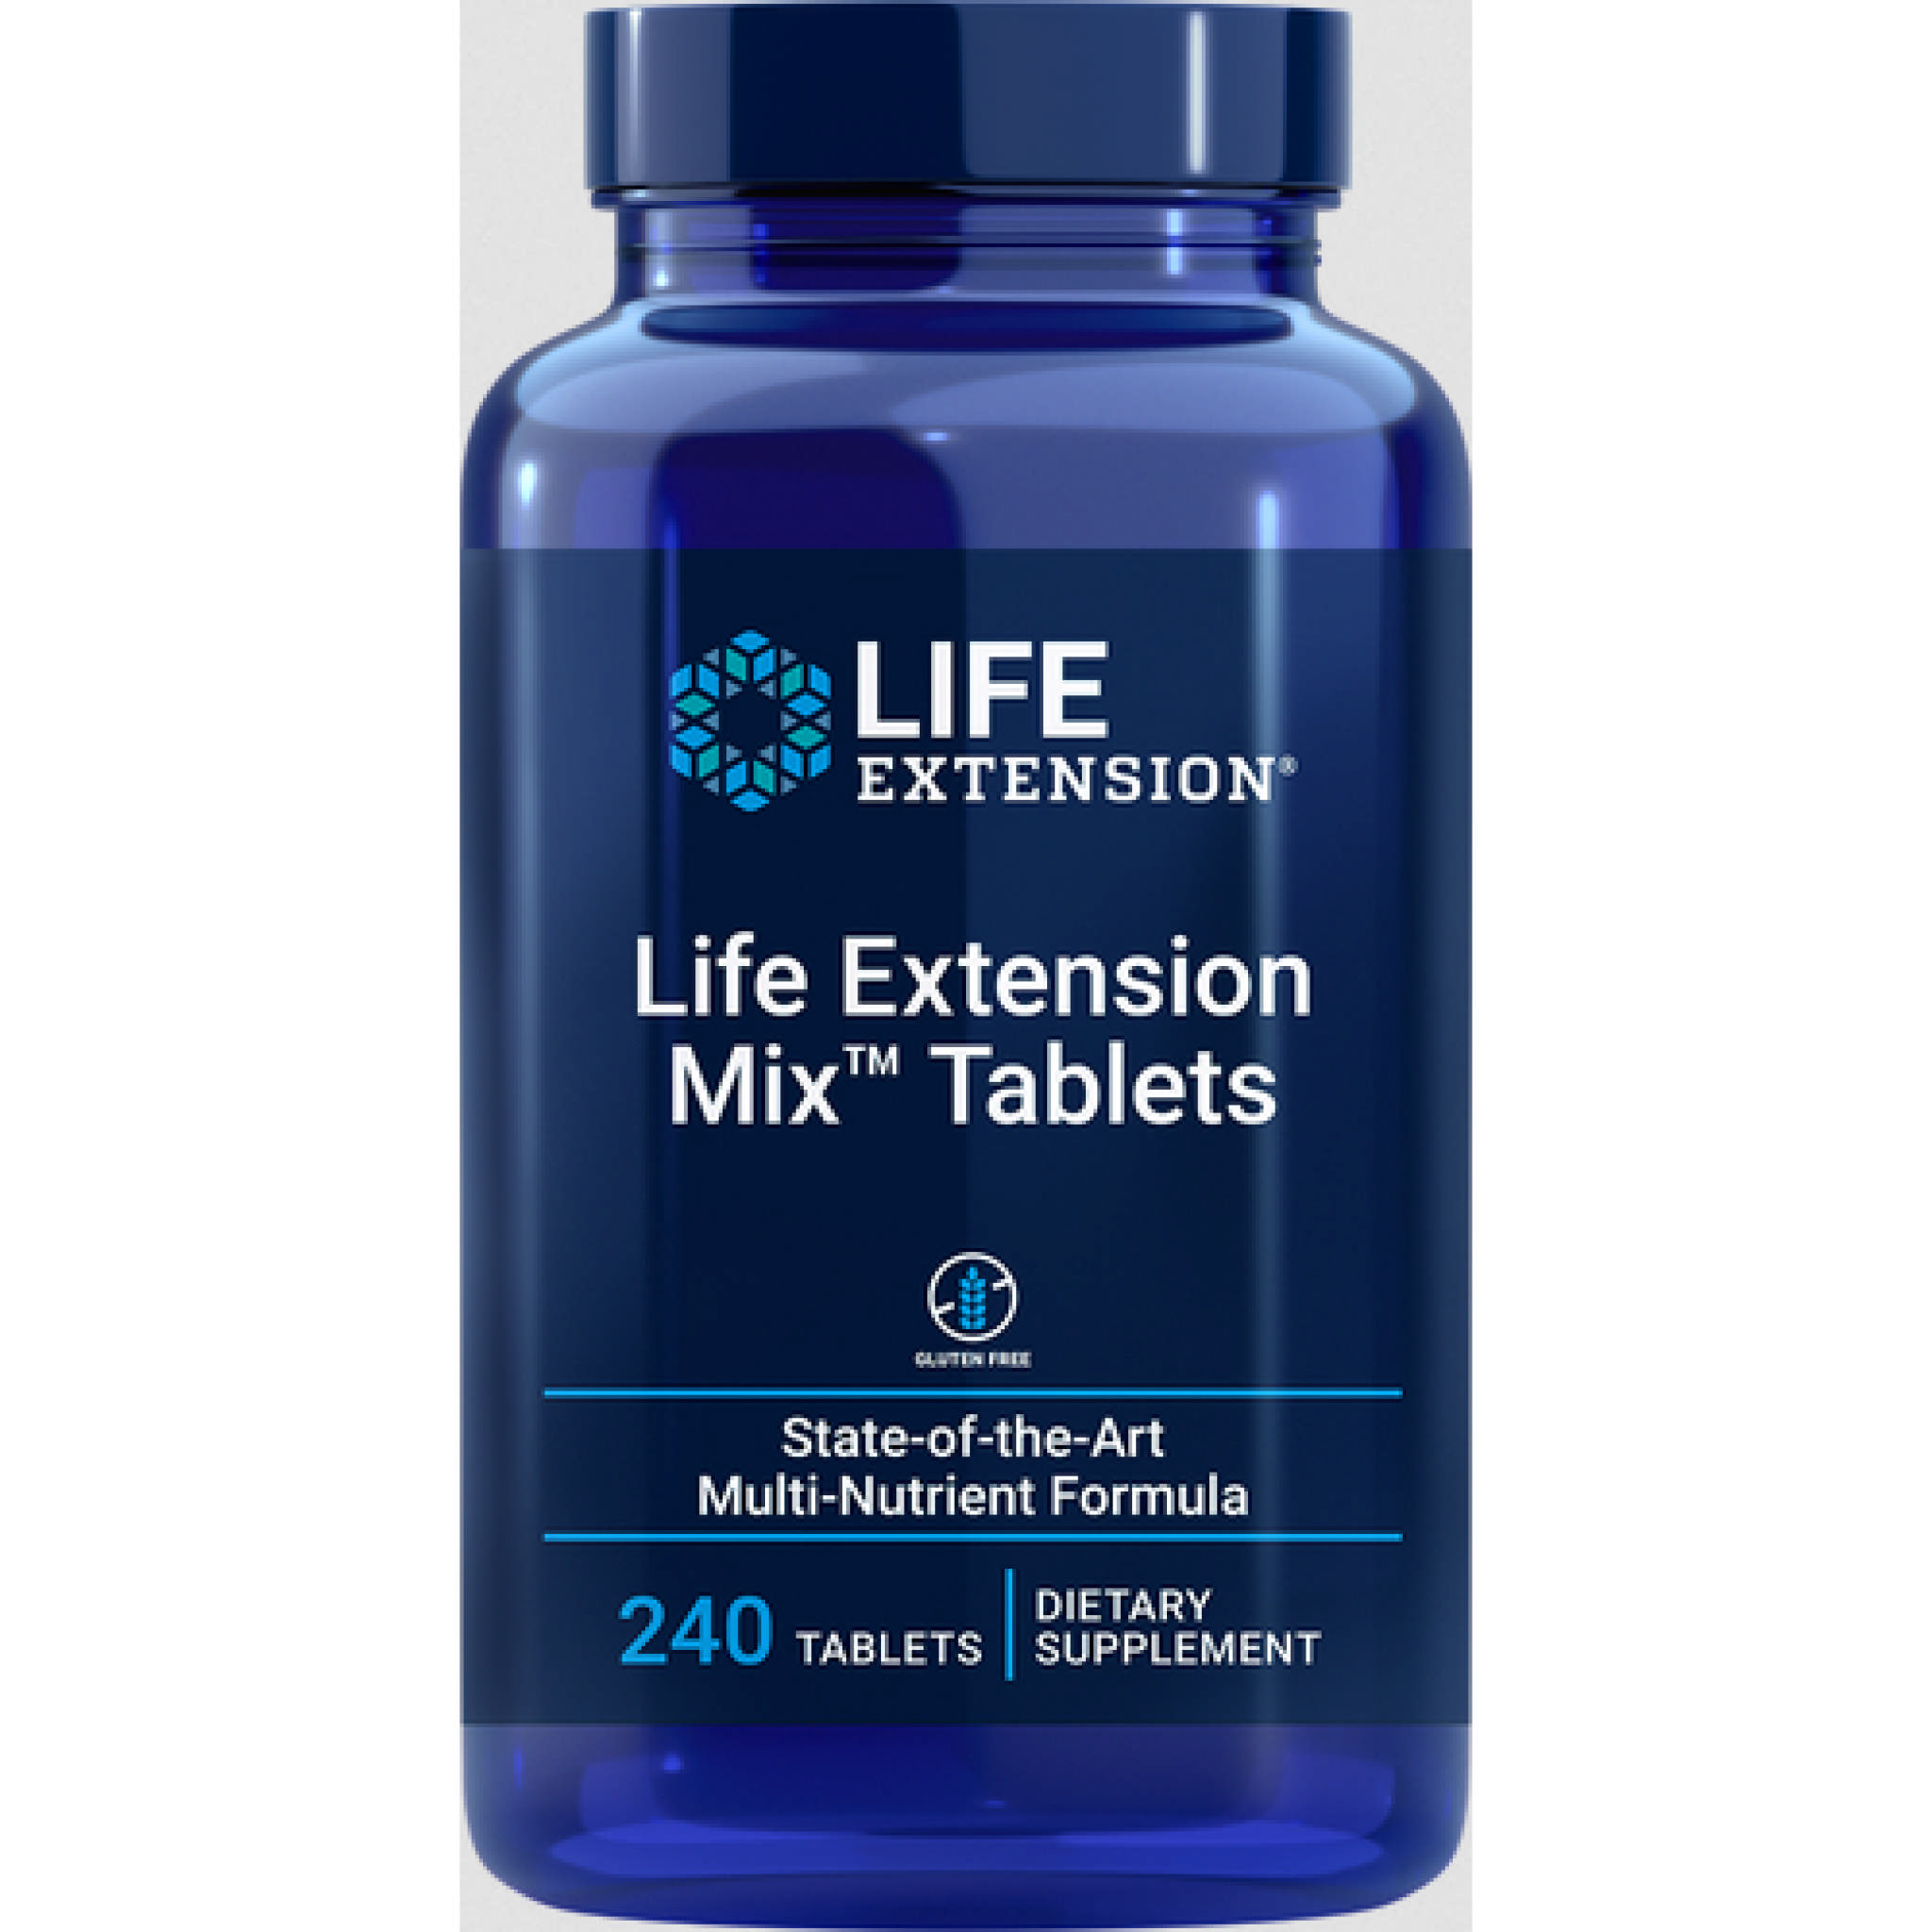 Life Extension - Life Extension Mix